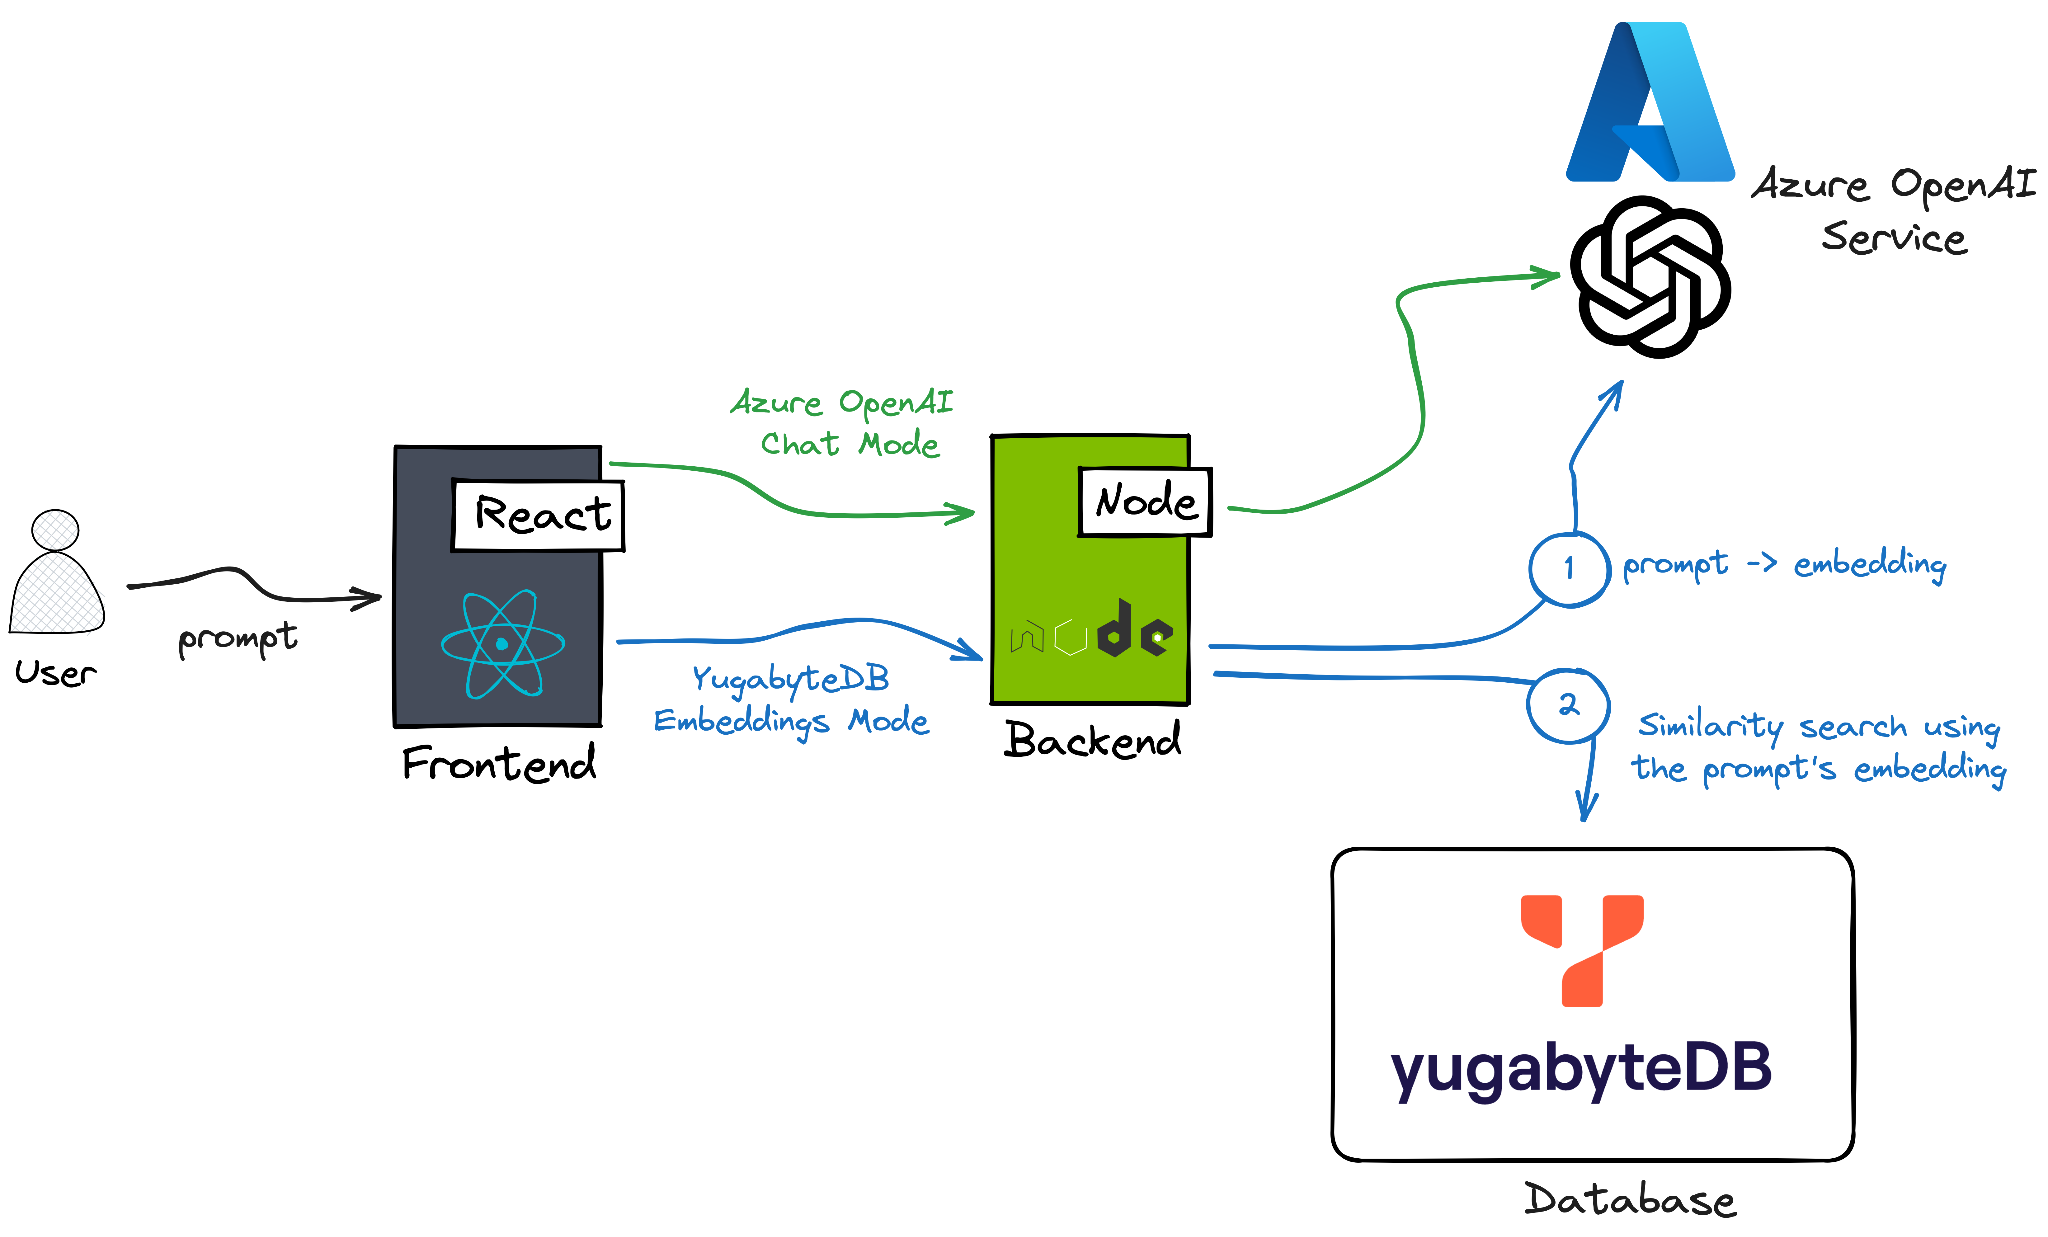 Architecture of a lodging recommendation service built on the Azure OpenAI Service and YugabyteDB